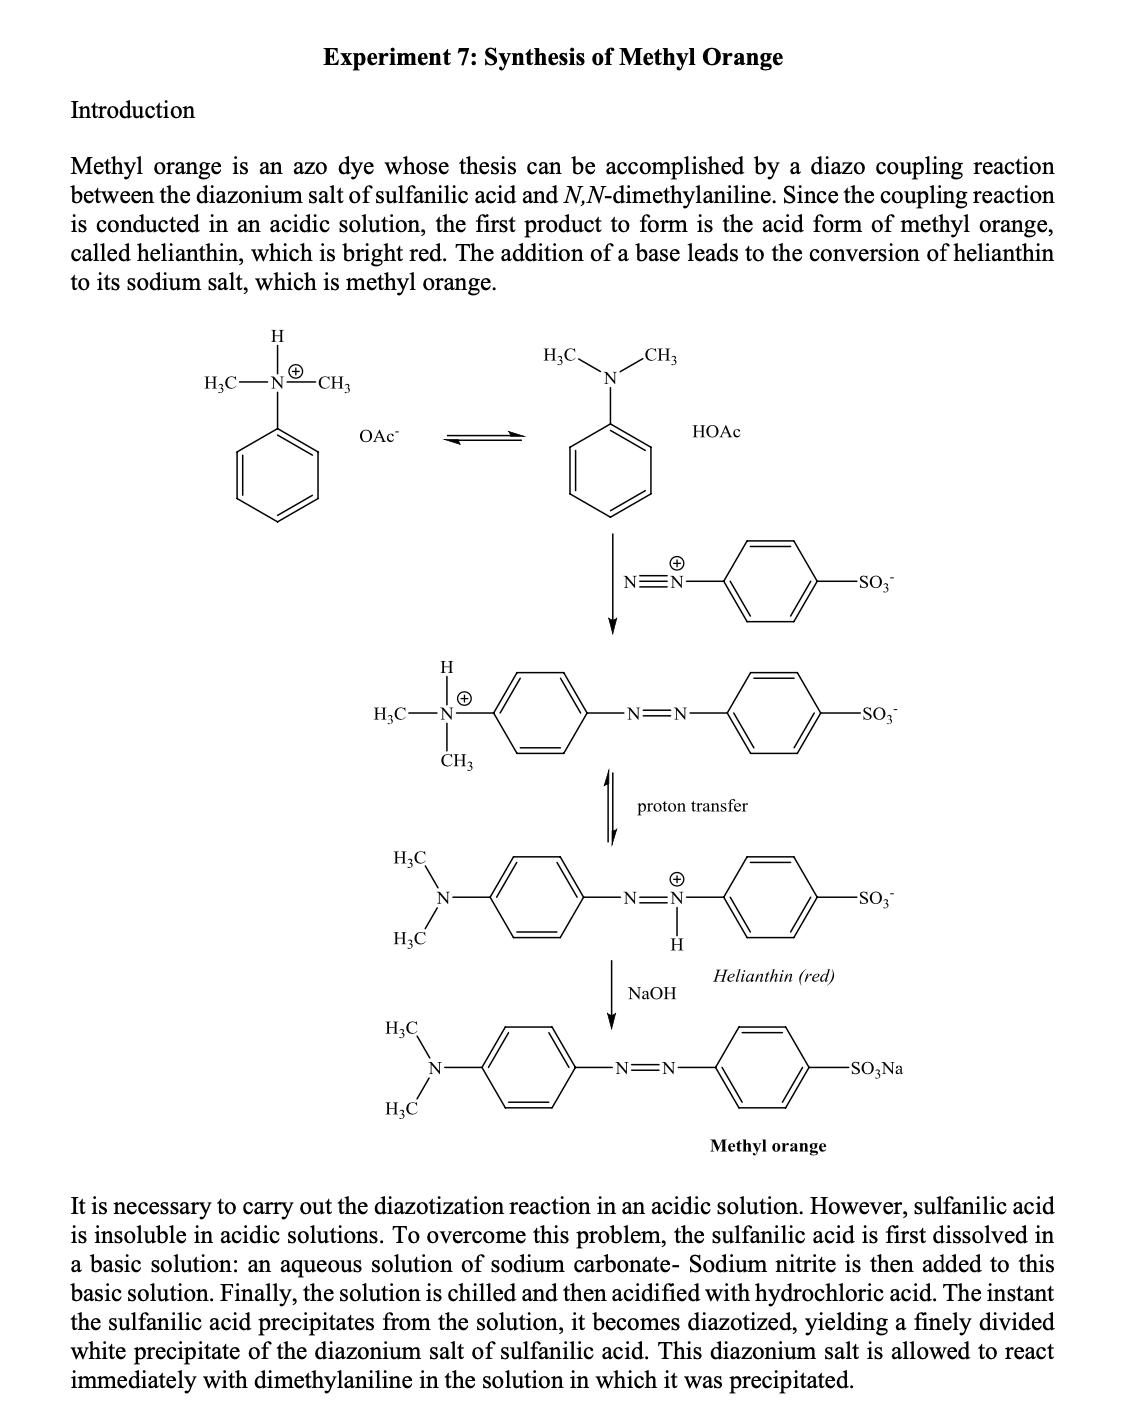 Experiment 7: Synthesis of Methyl Orange
Introduction
Methyl orange is an azo dye whose thesis can be accomplished by a diazo coupling reaction
between the diazonium salt of sulfanilic acid and N,N-dimethylaniline. Since the coupling reaction
is conducted in an acidic solution, the first product to form is the acid form of methyl orange,
called helianthin, which is bright red. The addition of a base leads to the conversion of helianthin
to its sodium salt, which is methyl orange.
H
H3C.
CH3
H3C-
N
CH3
OAc
НОАС
-SO3
H
H3C-
-N=N
SO,
CH3
proton transfer
H3C
H3C
Helianthin (red)
NaOH
H3C
N-
N =N
-SO;Na
H3C
Methyl orange
It is necessary to carry out the diazotization reaction in an acidic solution. However, sulfanilic acid
is insoluble in acidic solutions. To overcome this problem, the sulfanilic acid is first dissolved in
a basic solution: an aqueous solution of sodium carbonate- Sodium nitrite is then added to this
basic solution. Finally, the solution is chilled and then acidified with hydrochloric acid. The instant
the sulfanilic acid precipitates from the solution, it becomes diazotized, yielding a finely divided
white precipitate of the diazonium salt of sulfanilic acid. This diazonium salt is allowed to react
immediately with dimethylaniline in the solution in which it was precipitated.
